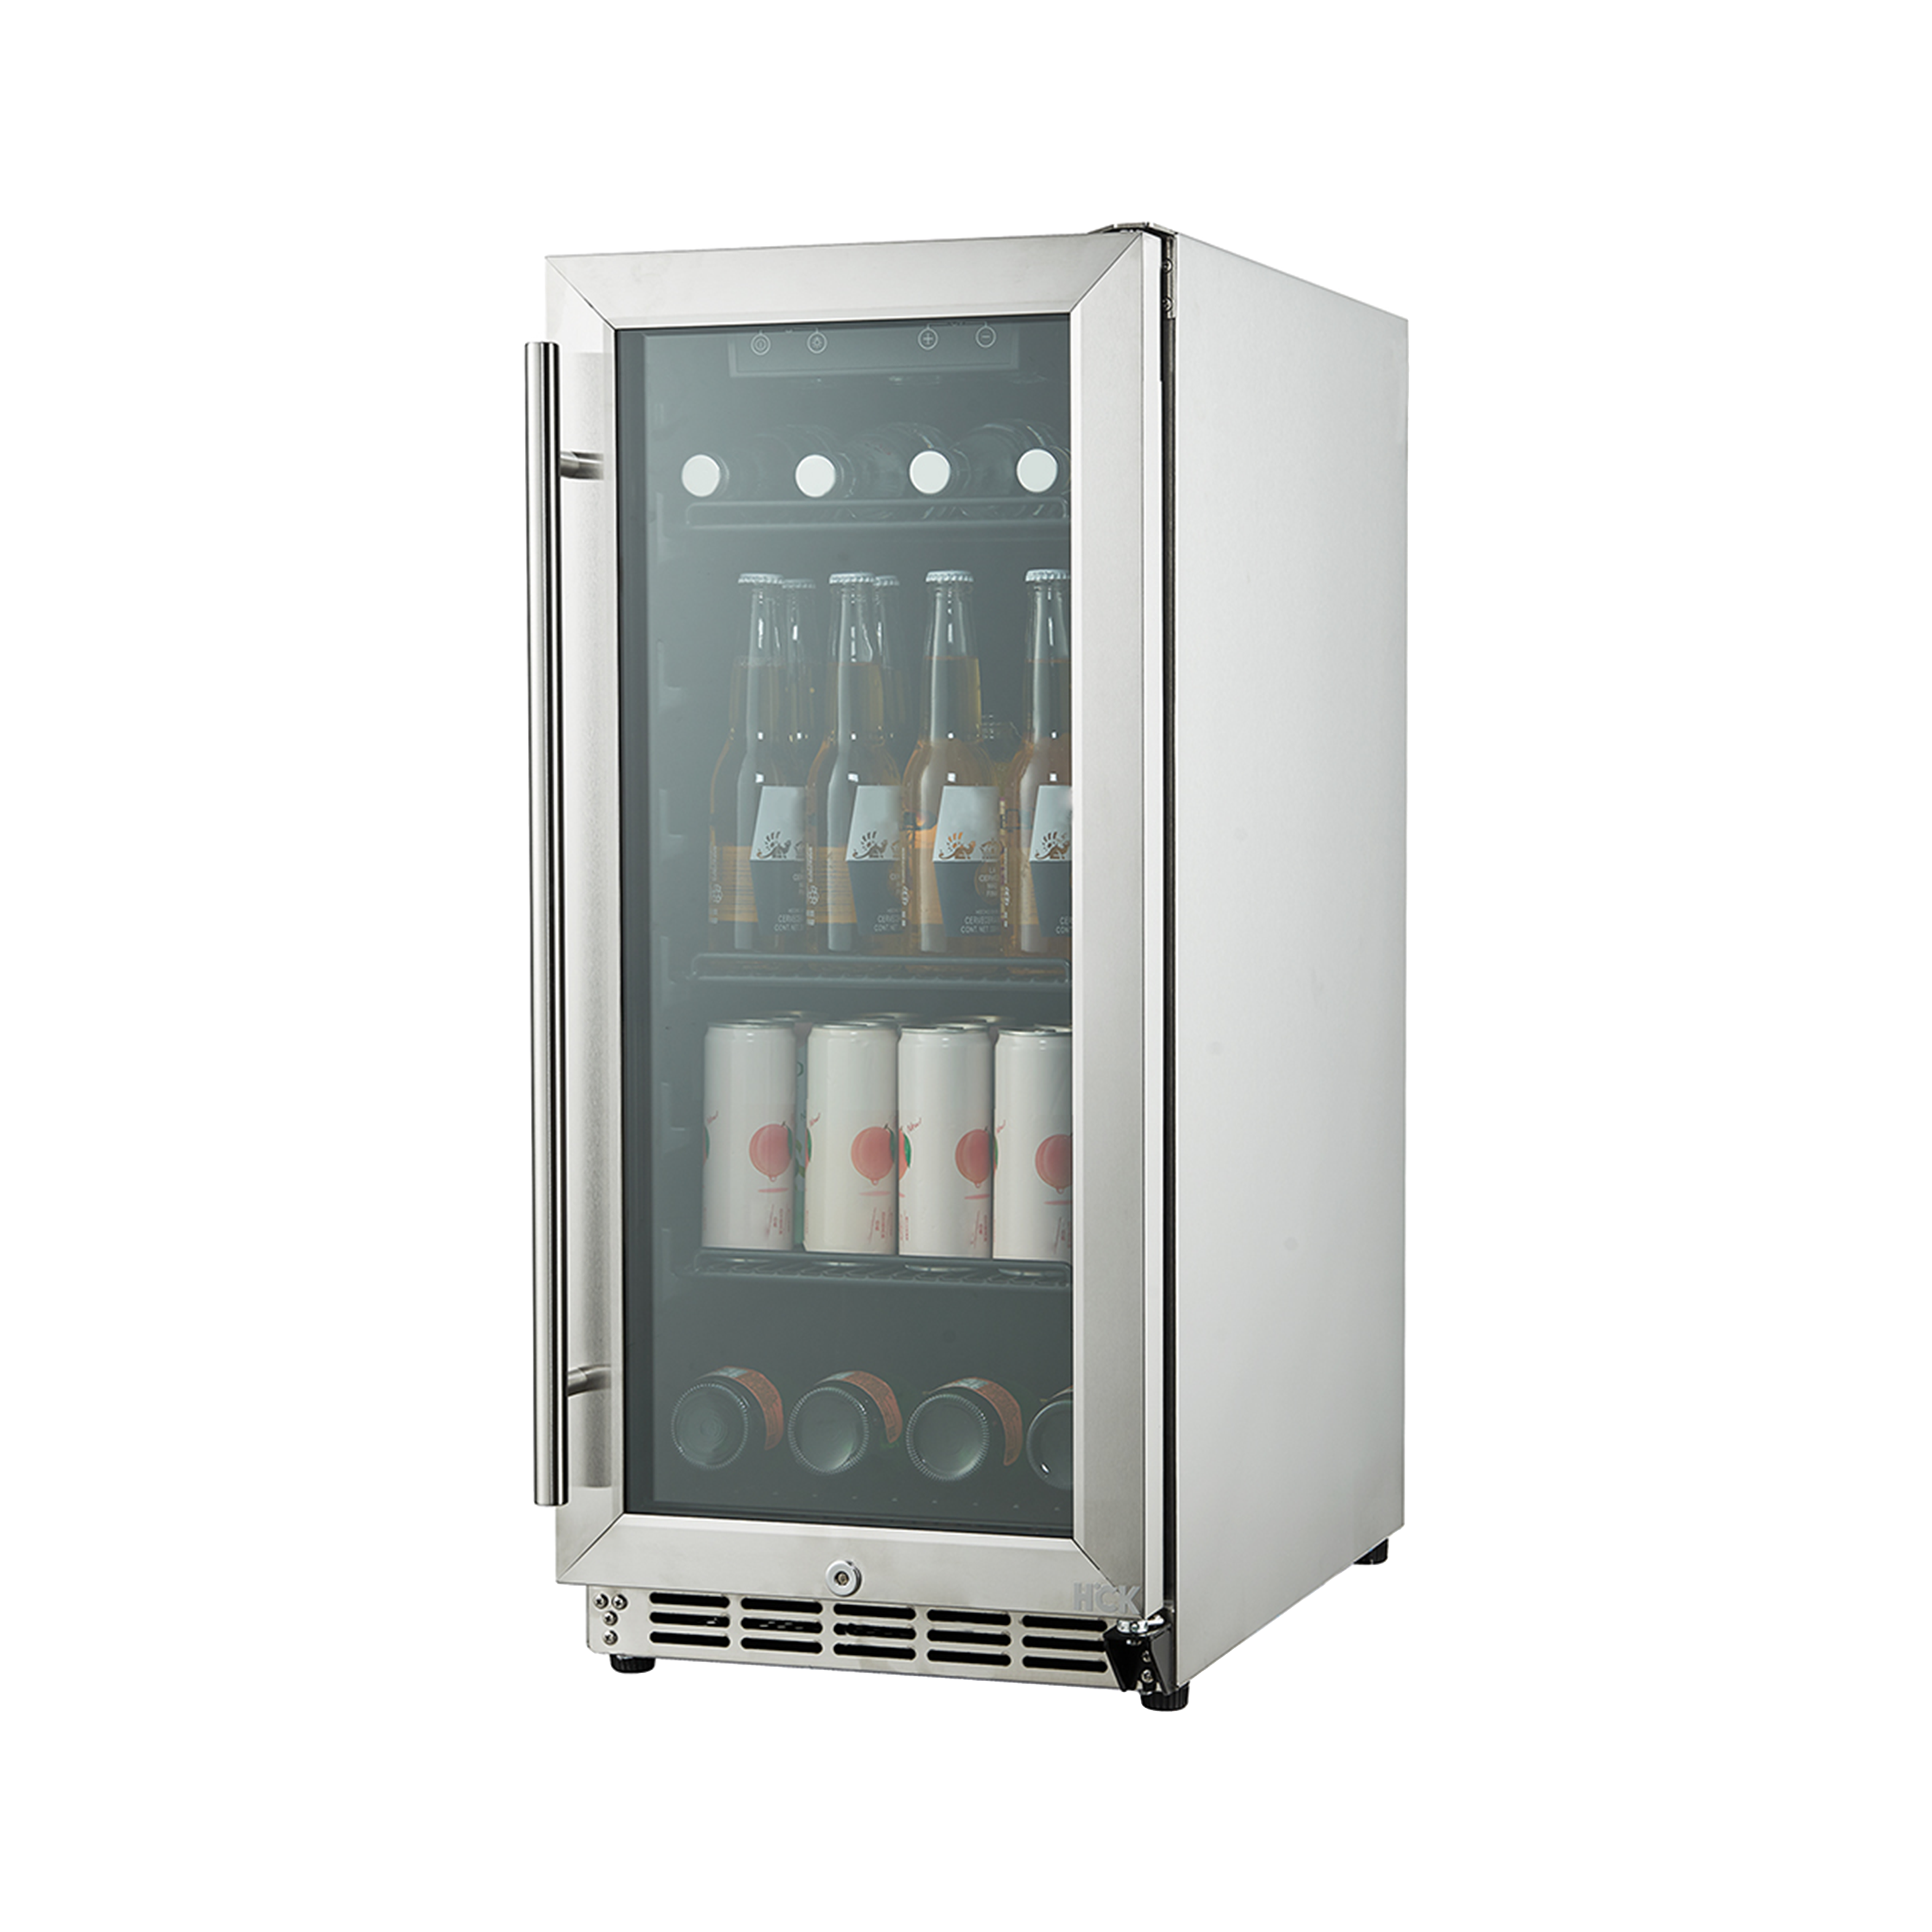 Side view of a 3.2 Cu Ft Compact Beverage Outdoor Refrigerator 96 cans with transparent door. The content of the fridge can be seen through the door